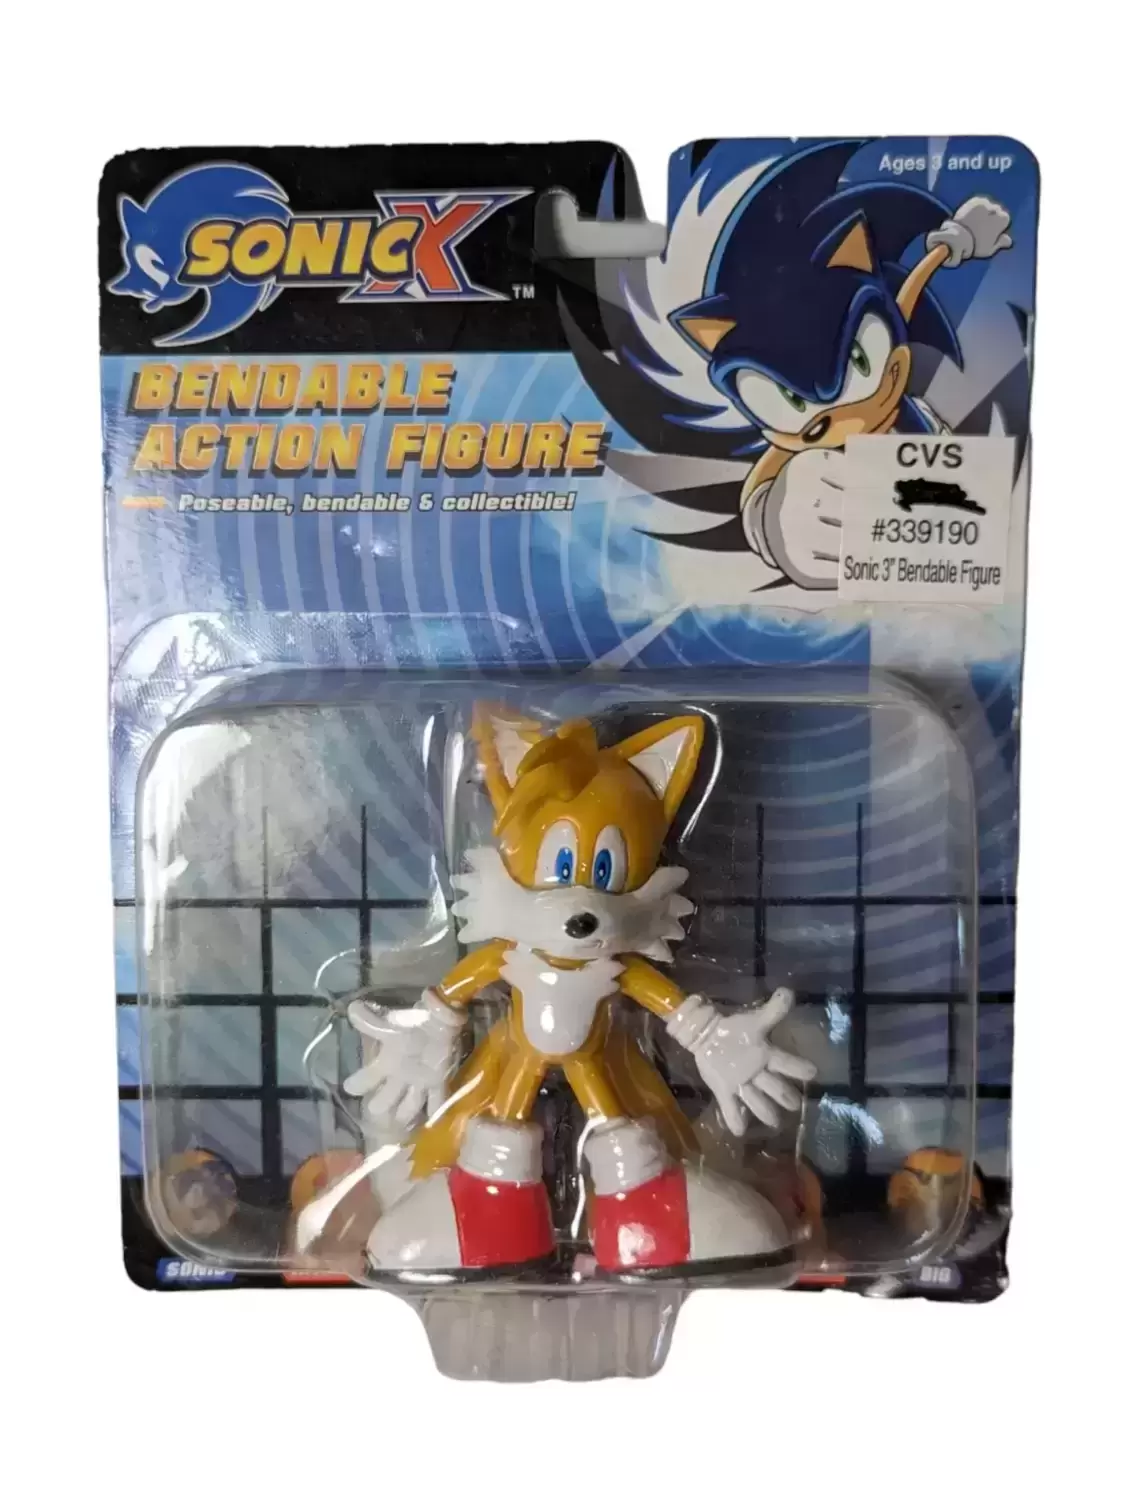 Sonic X - Sonic X - Tails Bendable